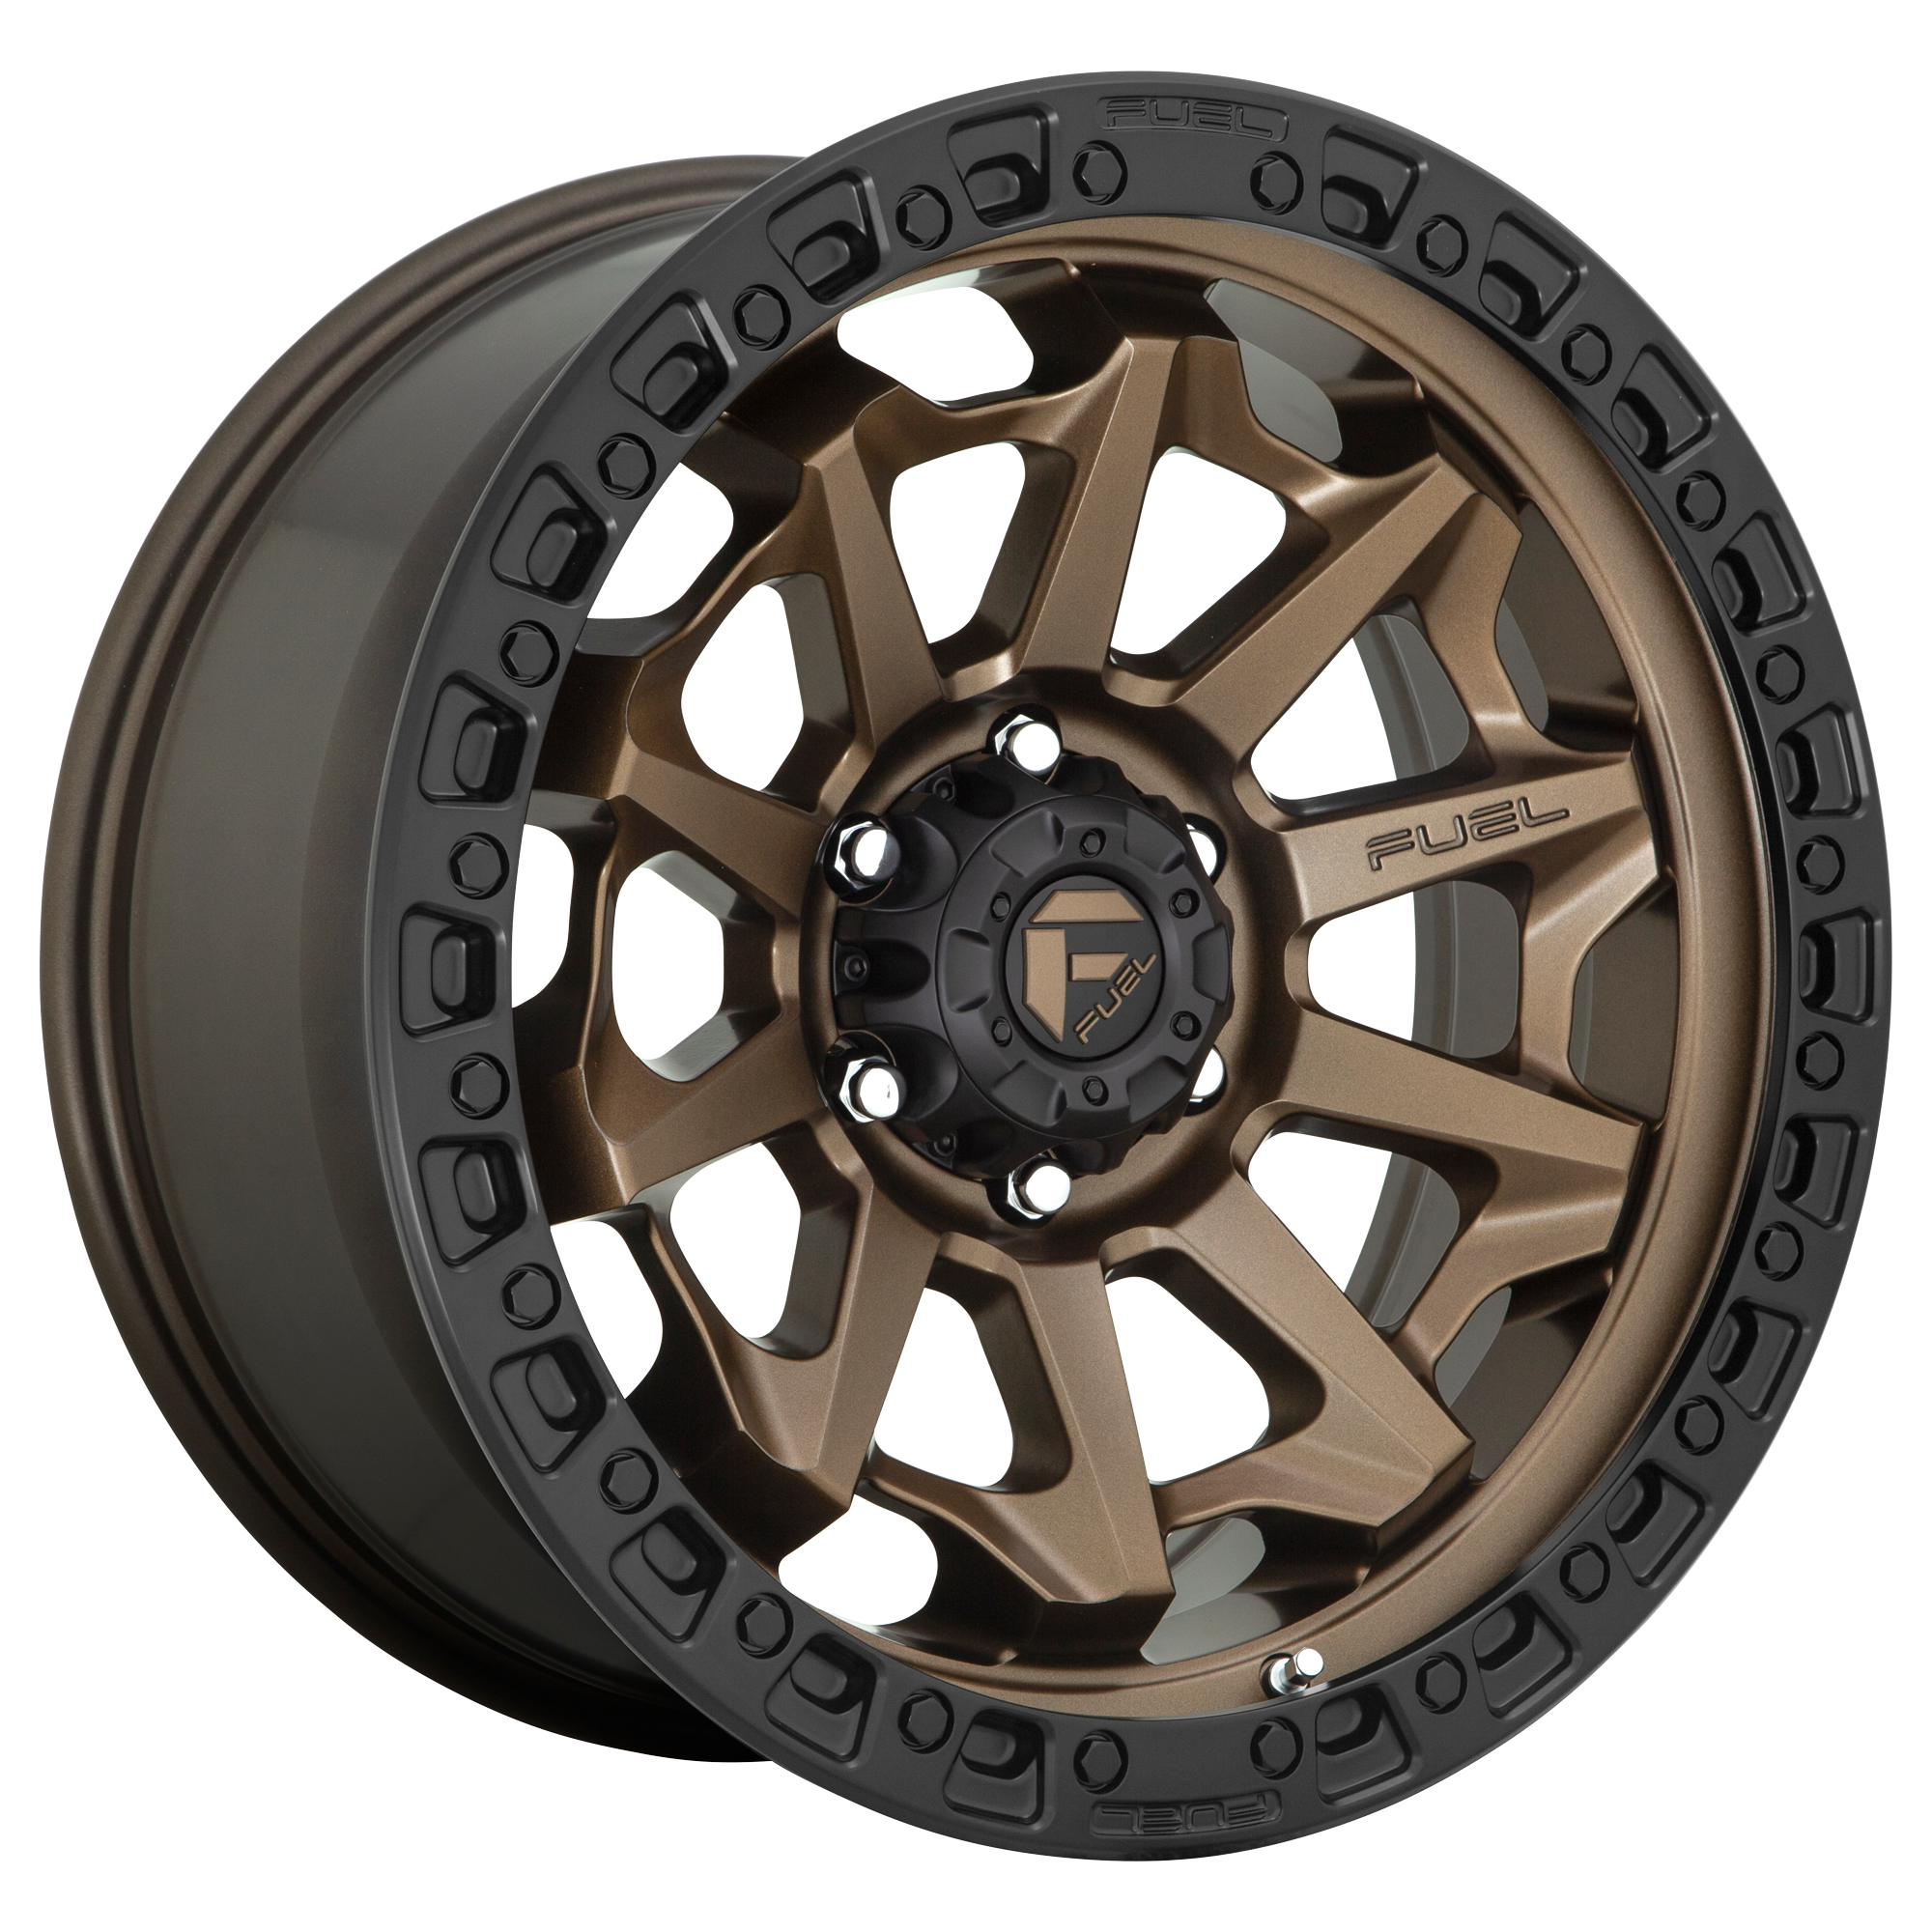 COVERT 18x9 8x180.00 MATTE BRONZE BLACK BEAD RING (20 mm) - Tires and Engine Performance